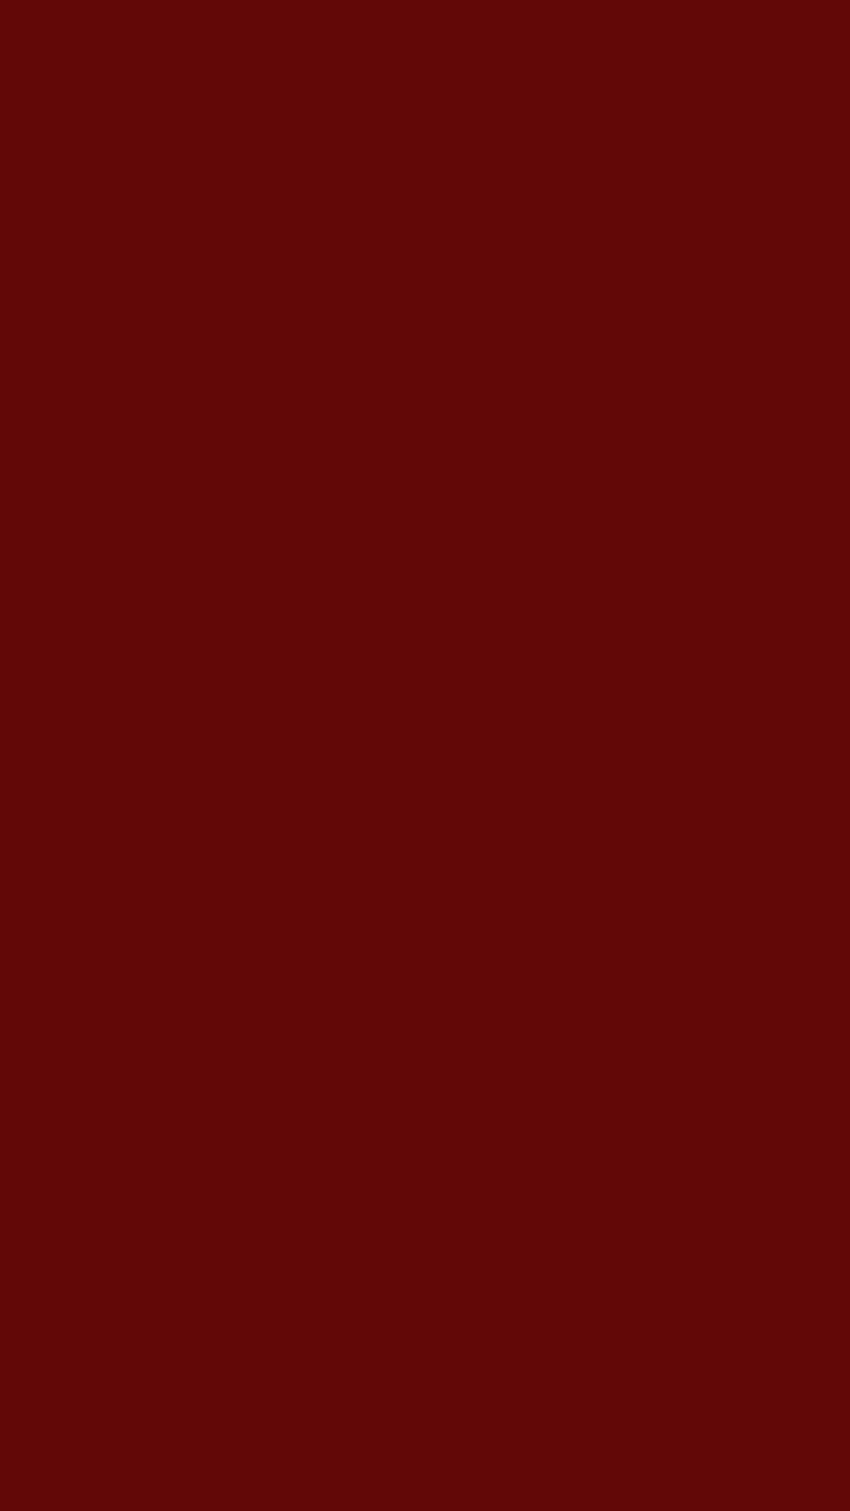 Burgundy And Gold Mobile in 2020. Forest green color, Solid color background, Dark forest HD phone wallpaper